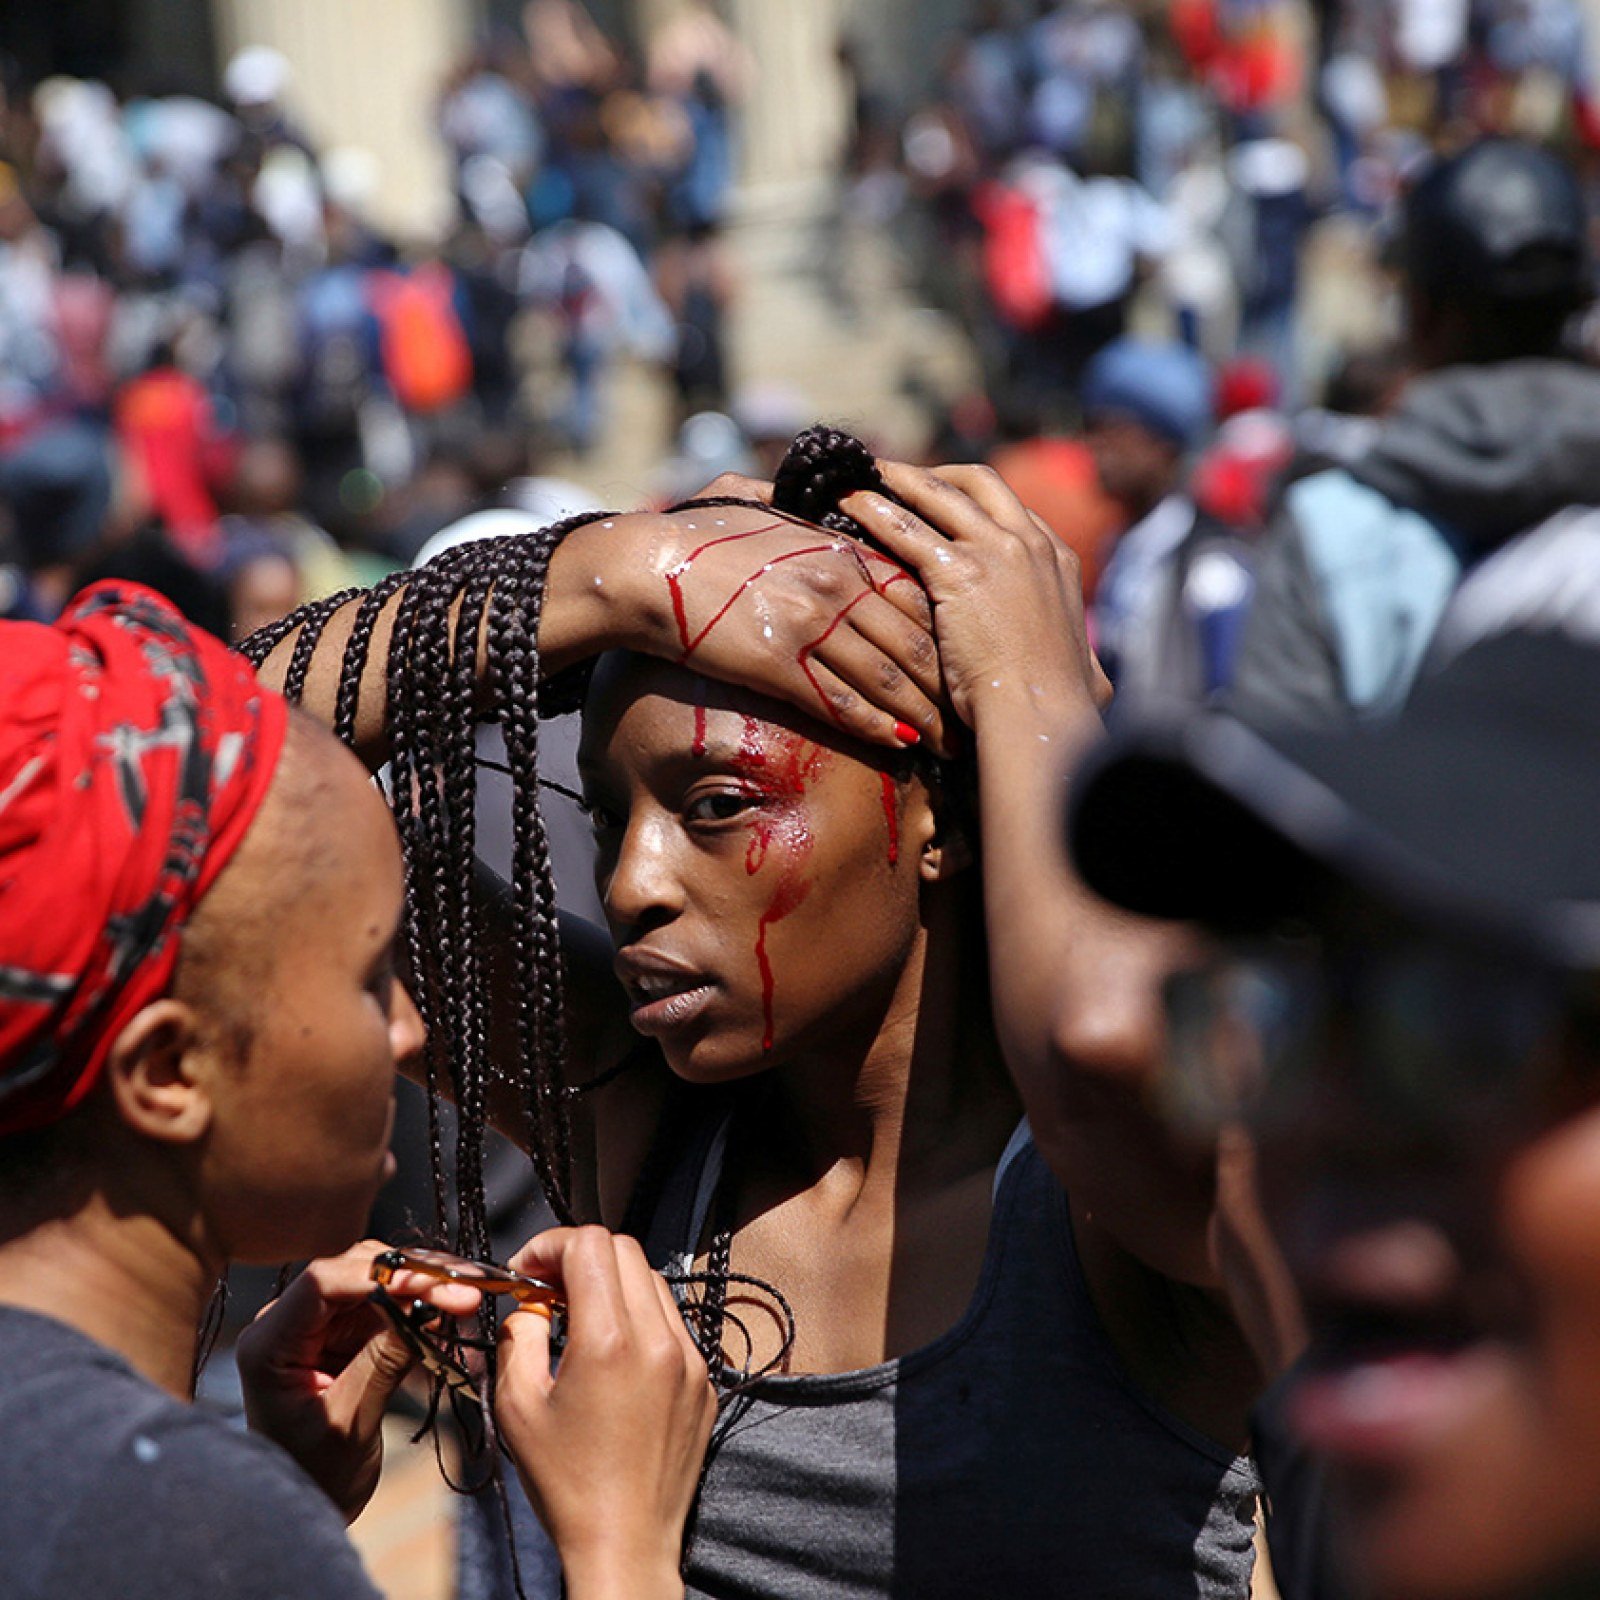 Examples of How Student's Human Rights were Violated during the #FeesMustFall Campaign